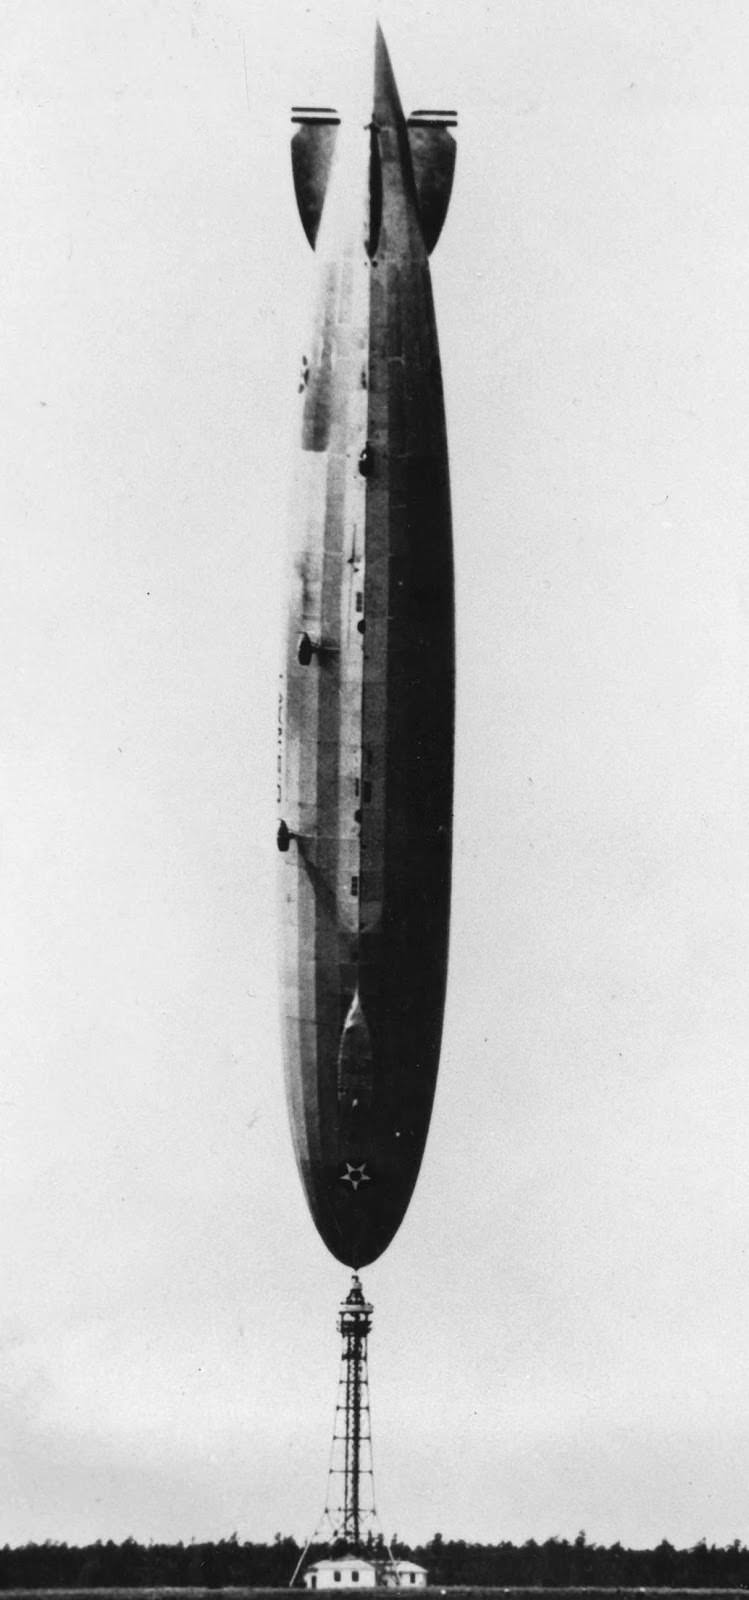 The U.S. Navy’s dirigible Los Angeles, upended after a turbulent wind from the Atlantic flipped the 700-foot airship on its nose at Lakehurst, New Jersey, in 1926.